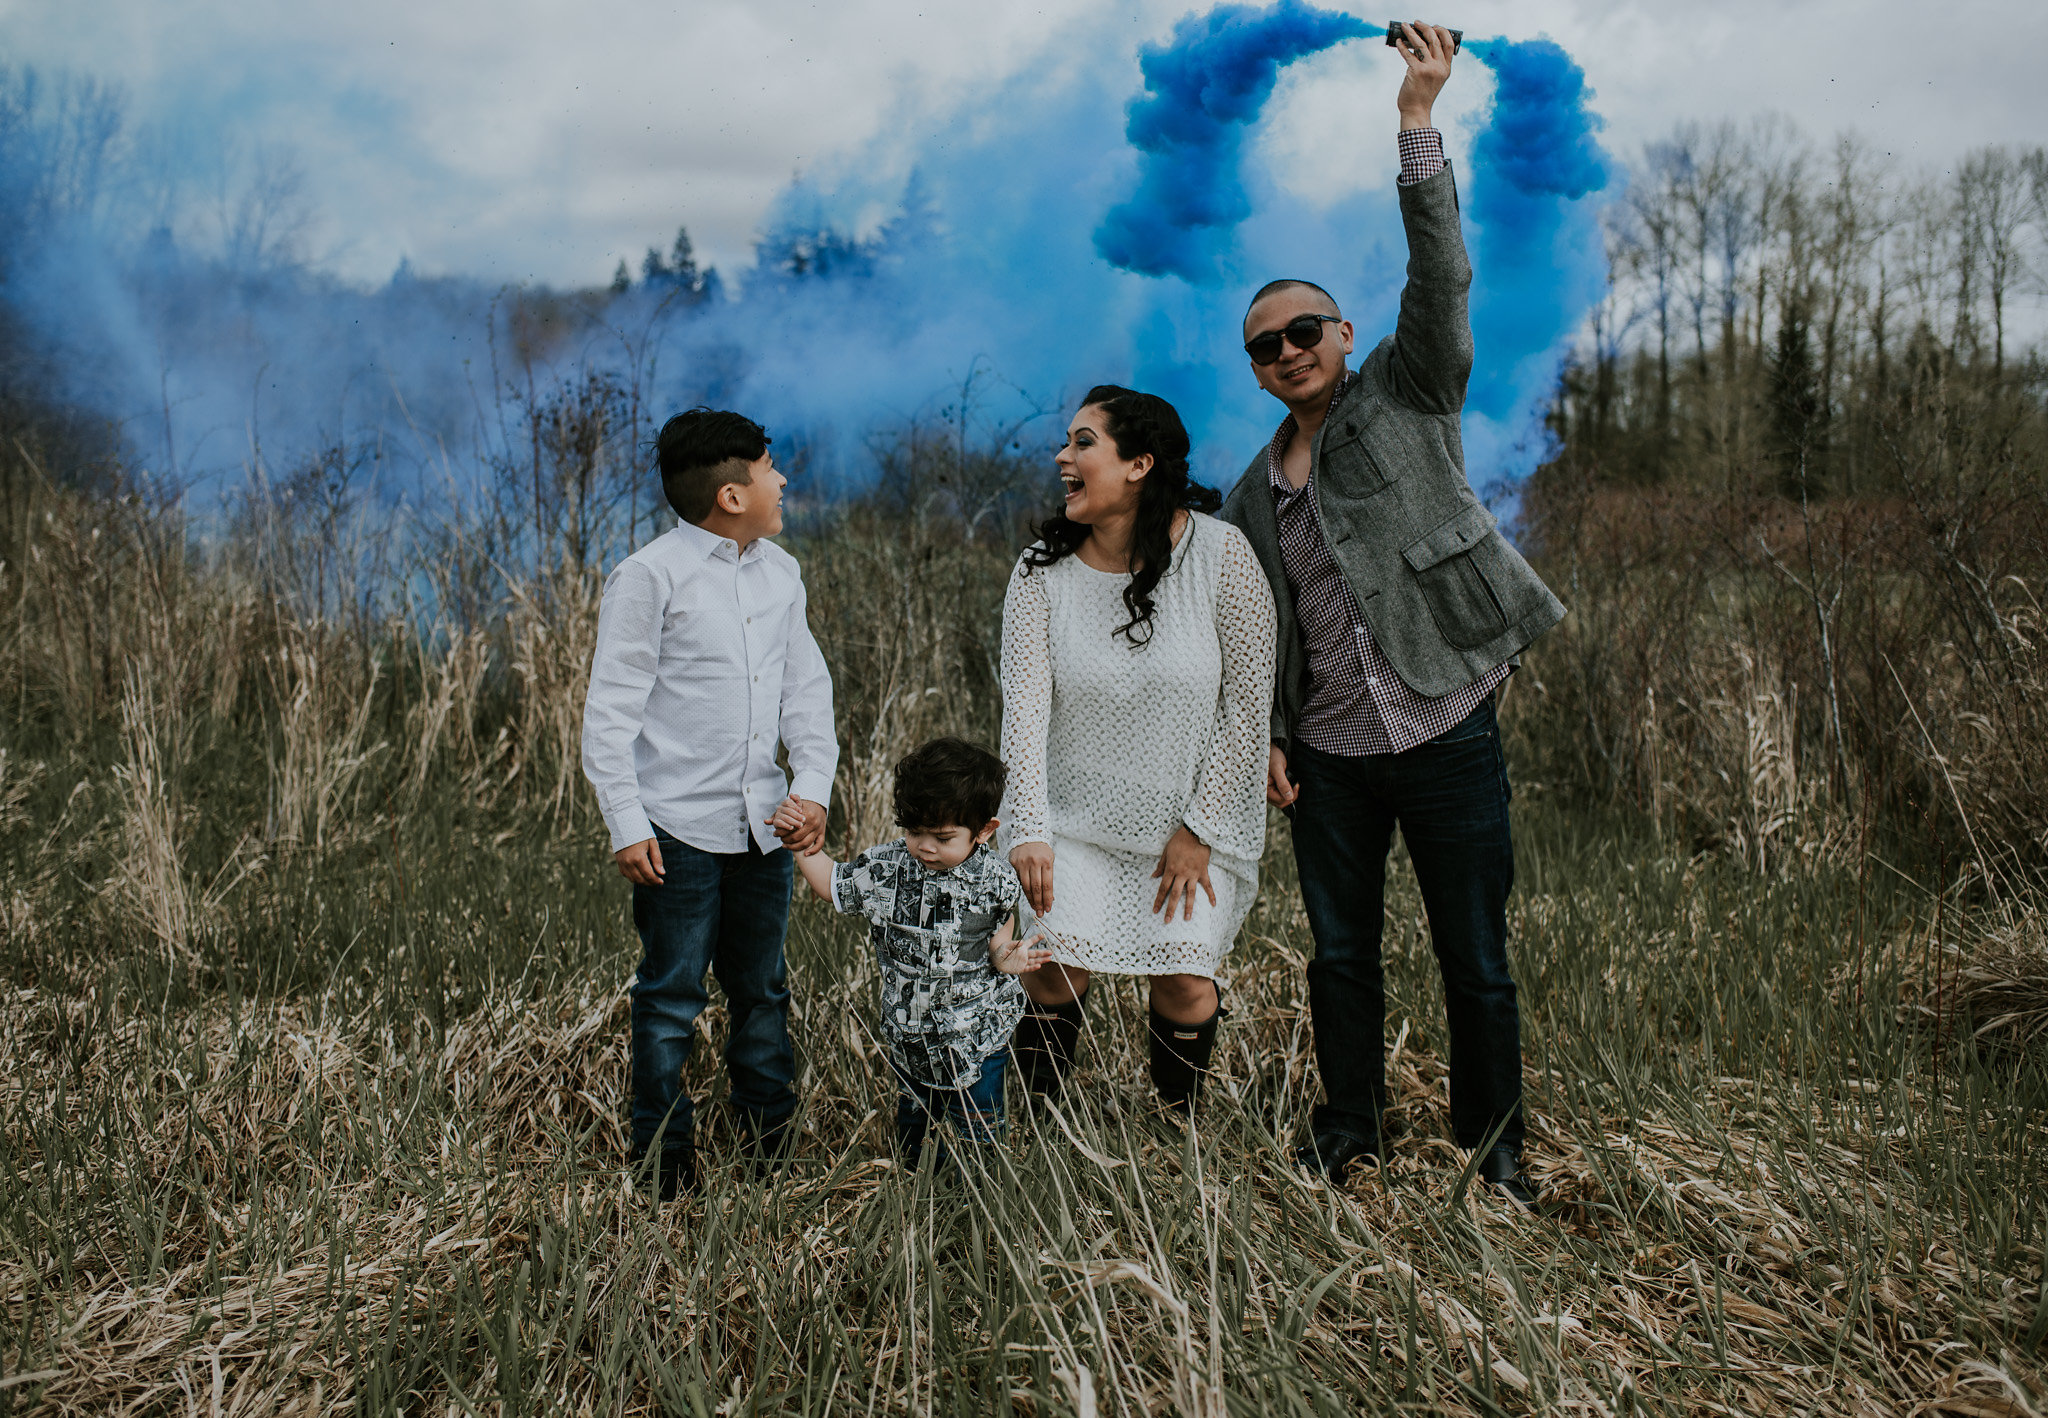 Unique Gender Reveal, Smoke Bomb Gender Reveal, It's a Boy Gender Reveal, White Dress with Bell Sleeves, Floral Crown, Blue and White Floral Crown, Smoke Bomb Reveal, Gender Reveal Ideas, Baby Shower Outfit